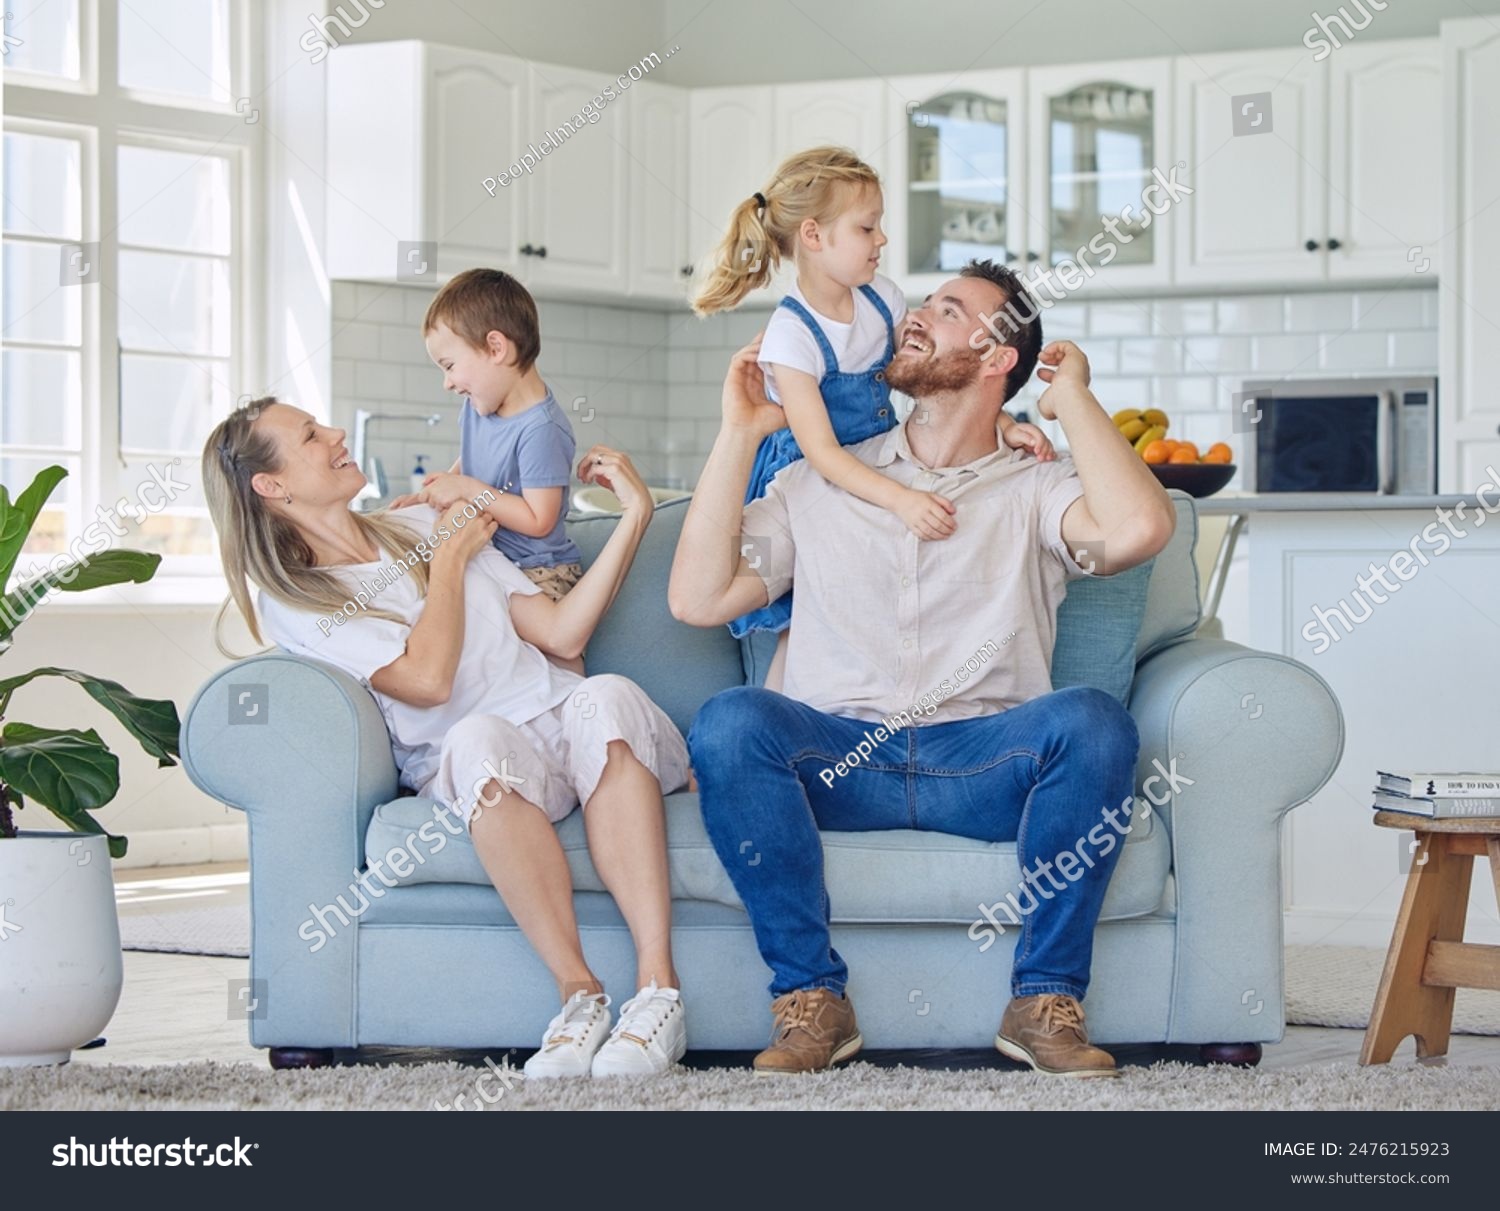 Fun, smile and family relax on sofa house for bonding, love and care or hug in living room together. Happy, woman and man with children for childhood, support and trust of memory at home break